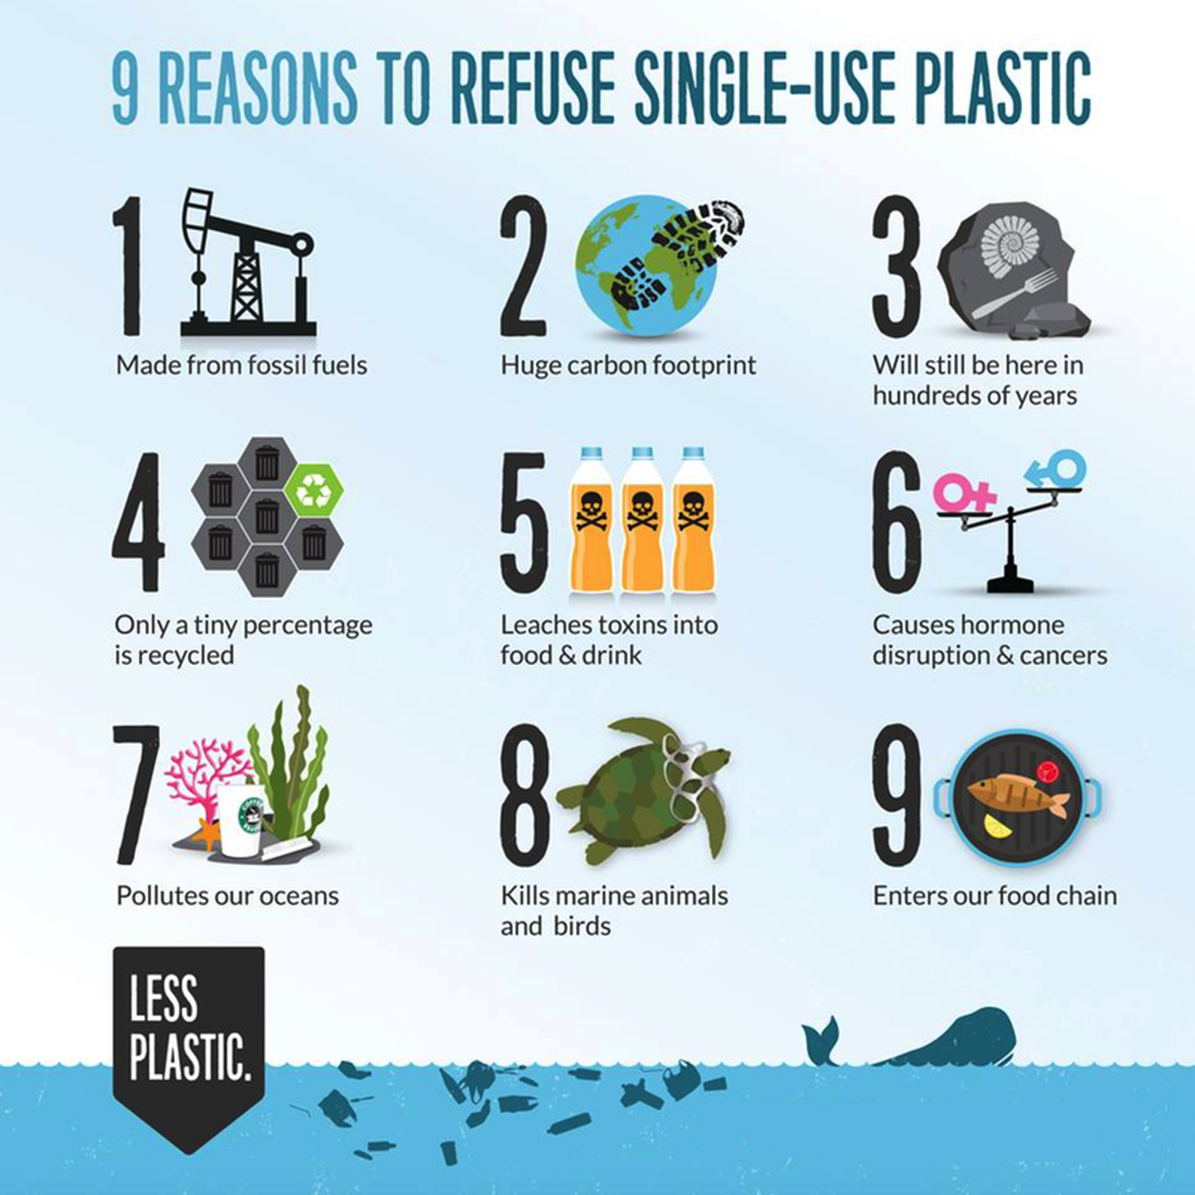 10 Easy Ways to Reduce Our Plastic Waste - Behaviour Change Cornwall